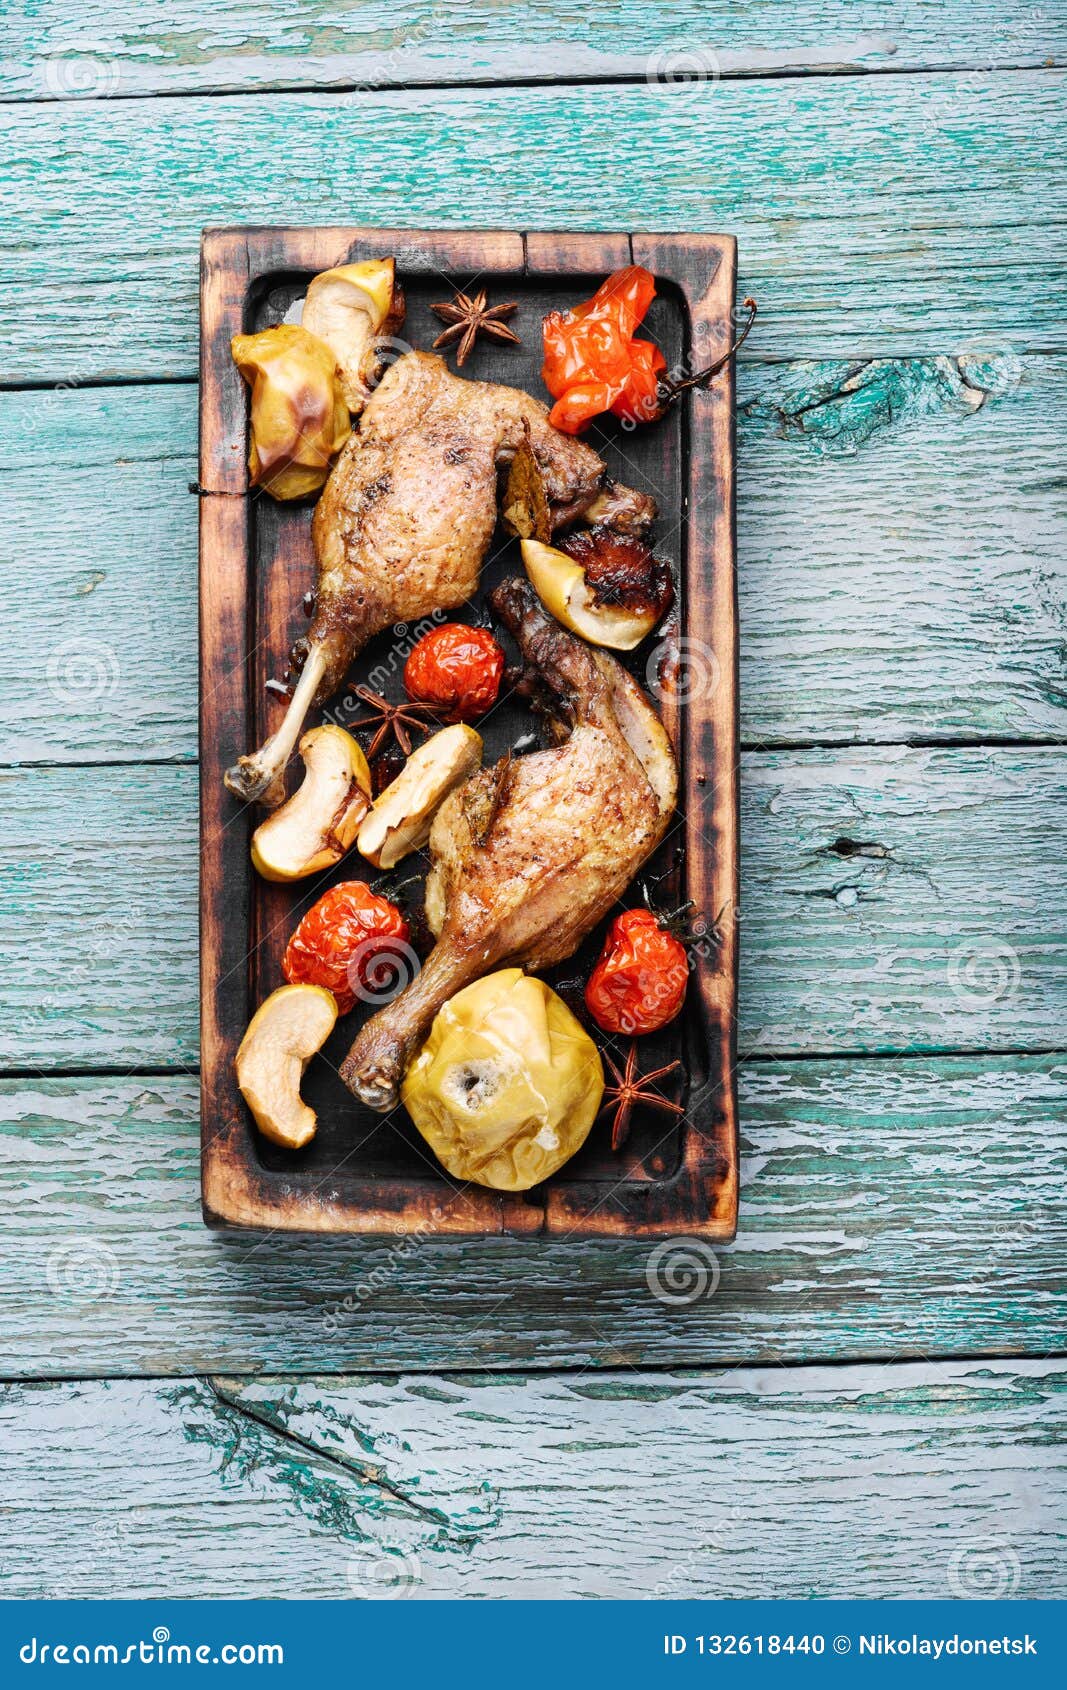 Roast duck with vegetable stock photo. Image of menu - 132618440